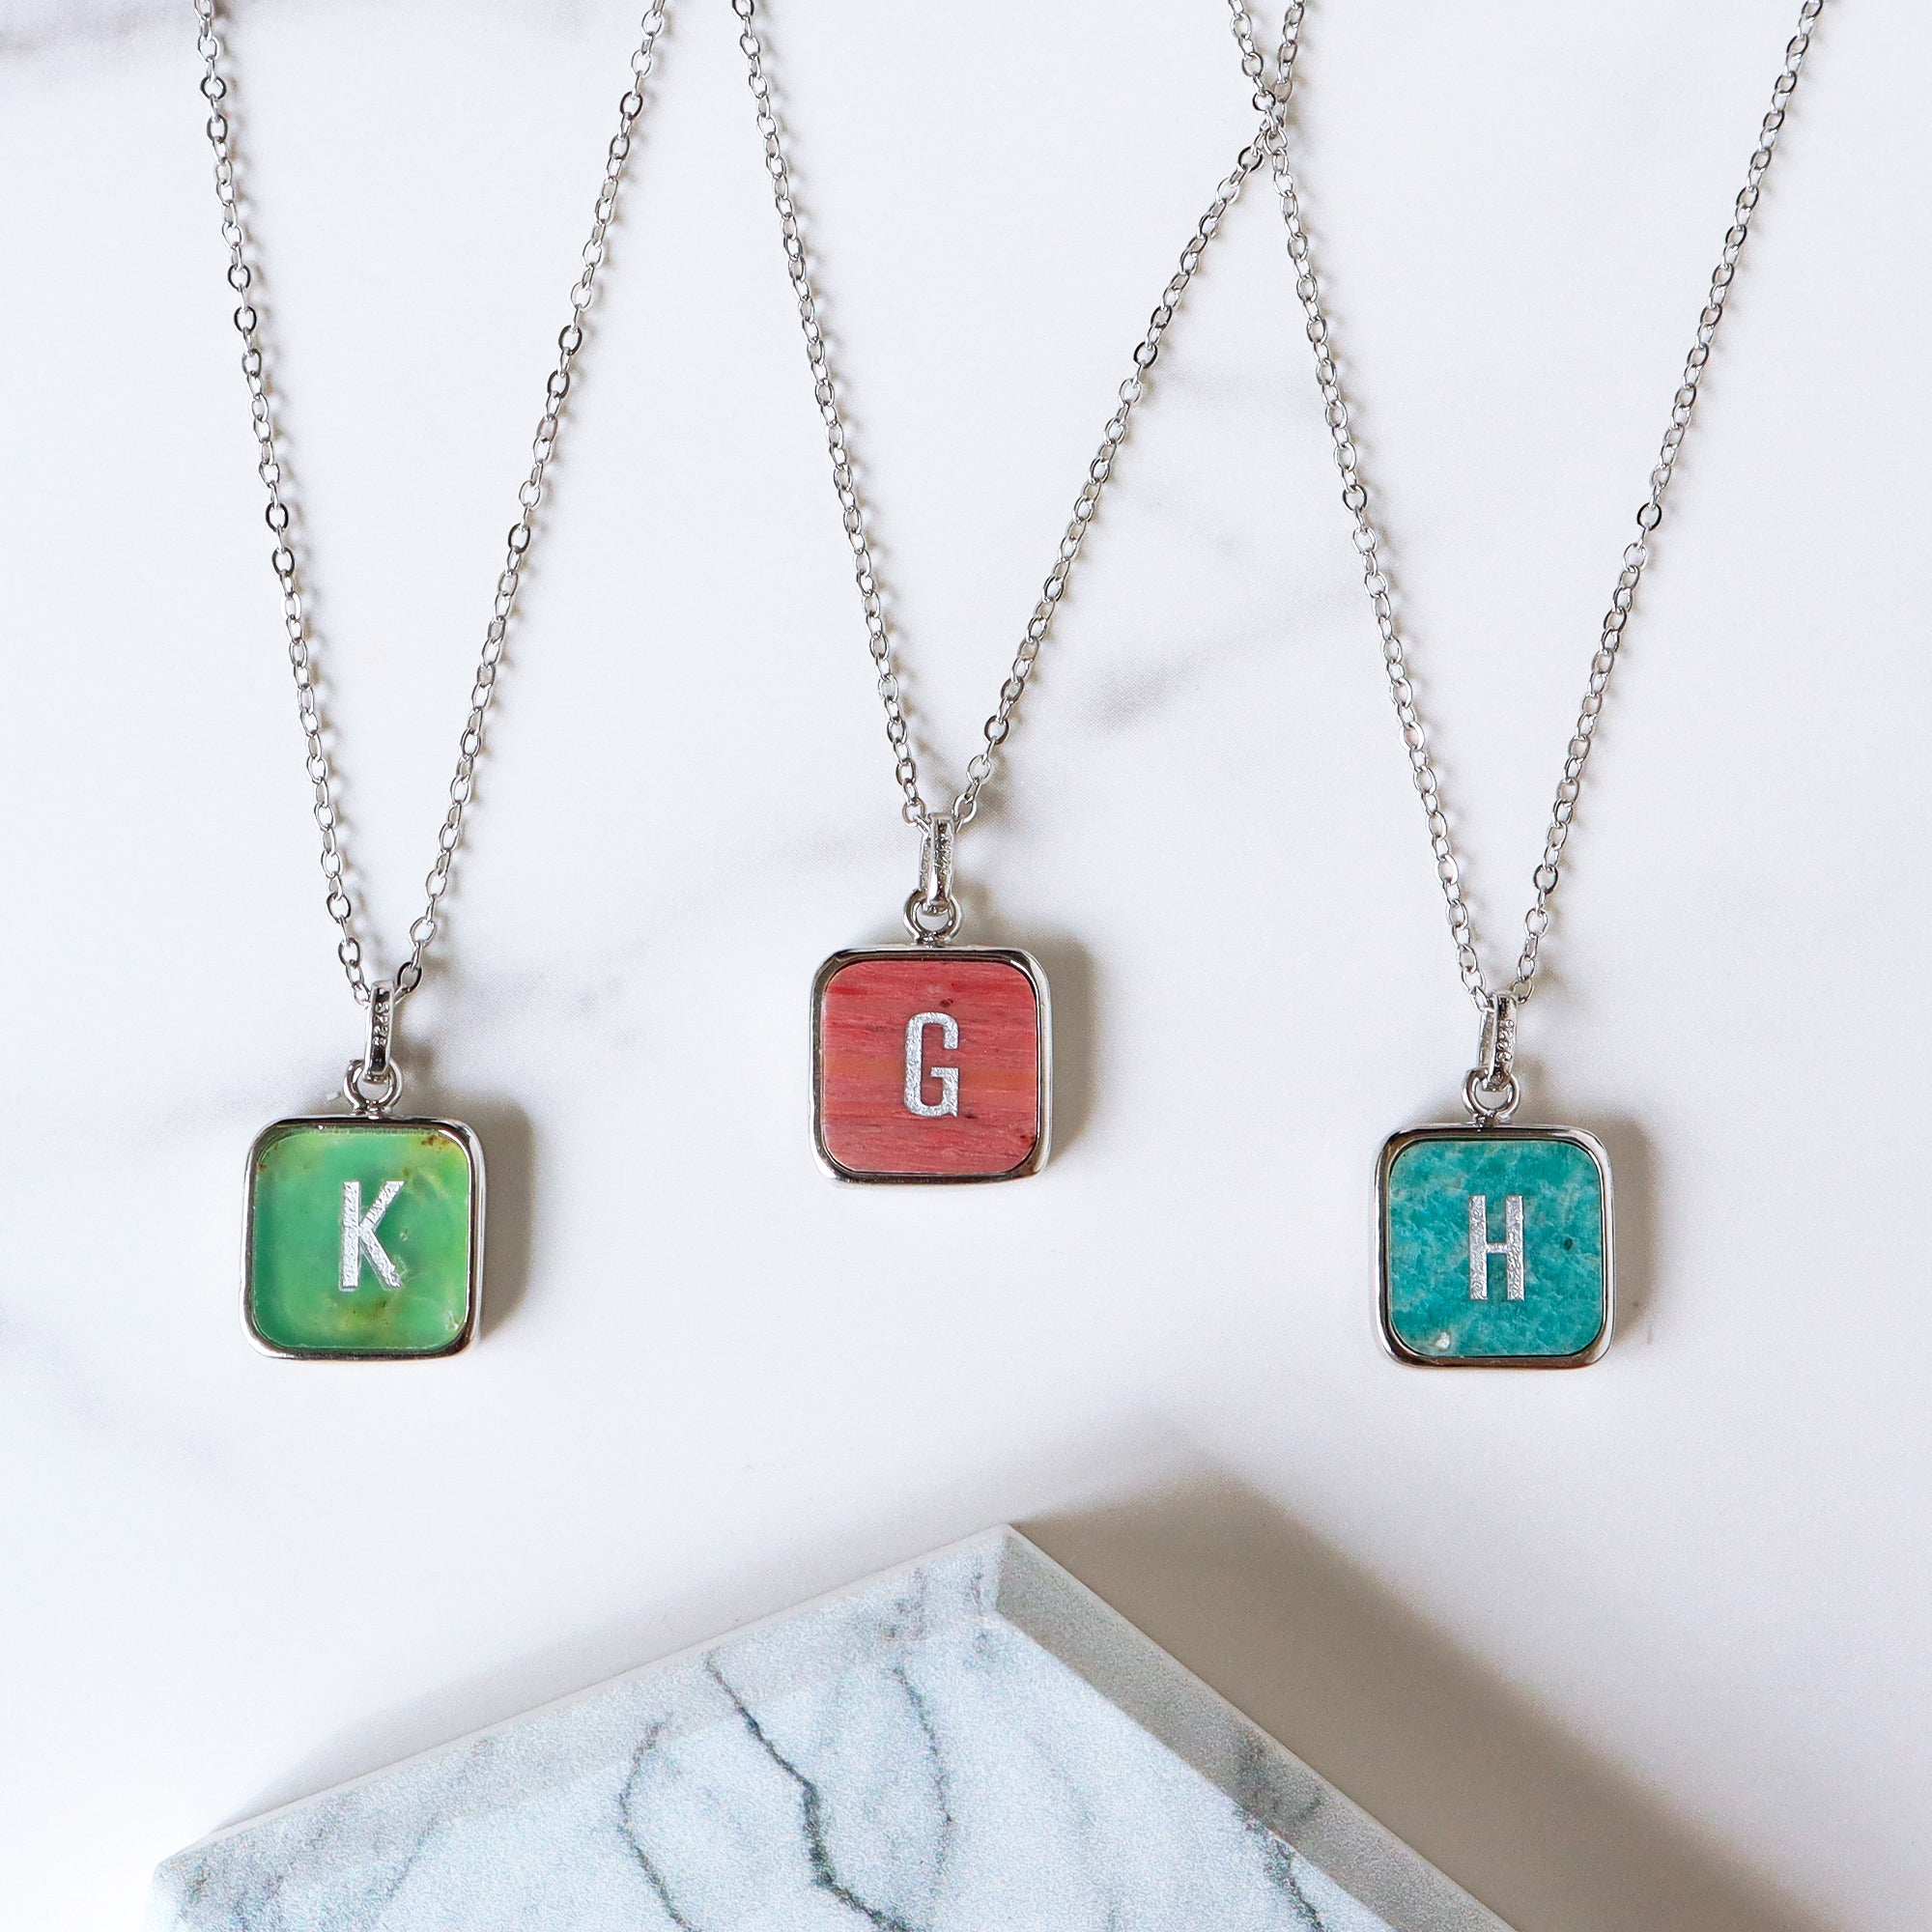 Wholesale 16" Square Silver Plated Gemstone Pendant Necklace, Carved Letters, Crystal Square Pendant Jewelry KZ002